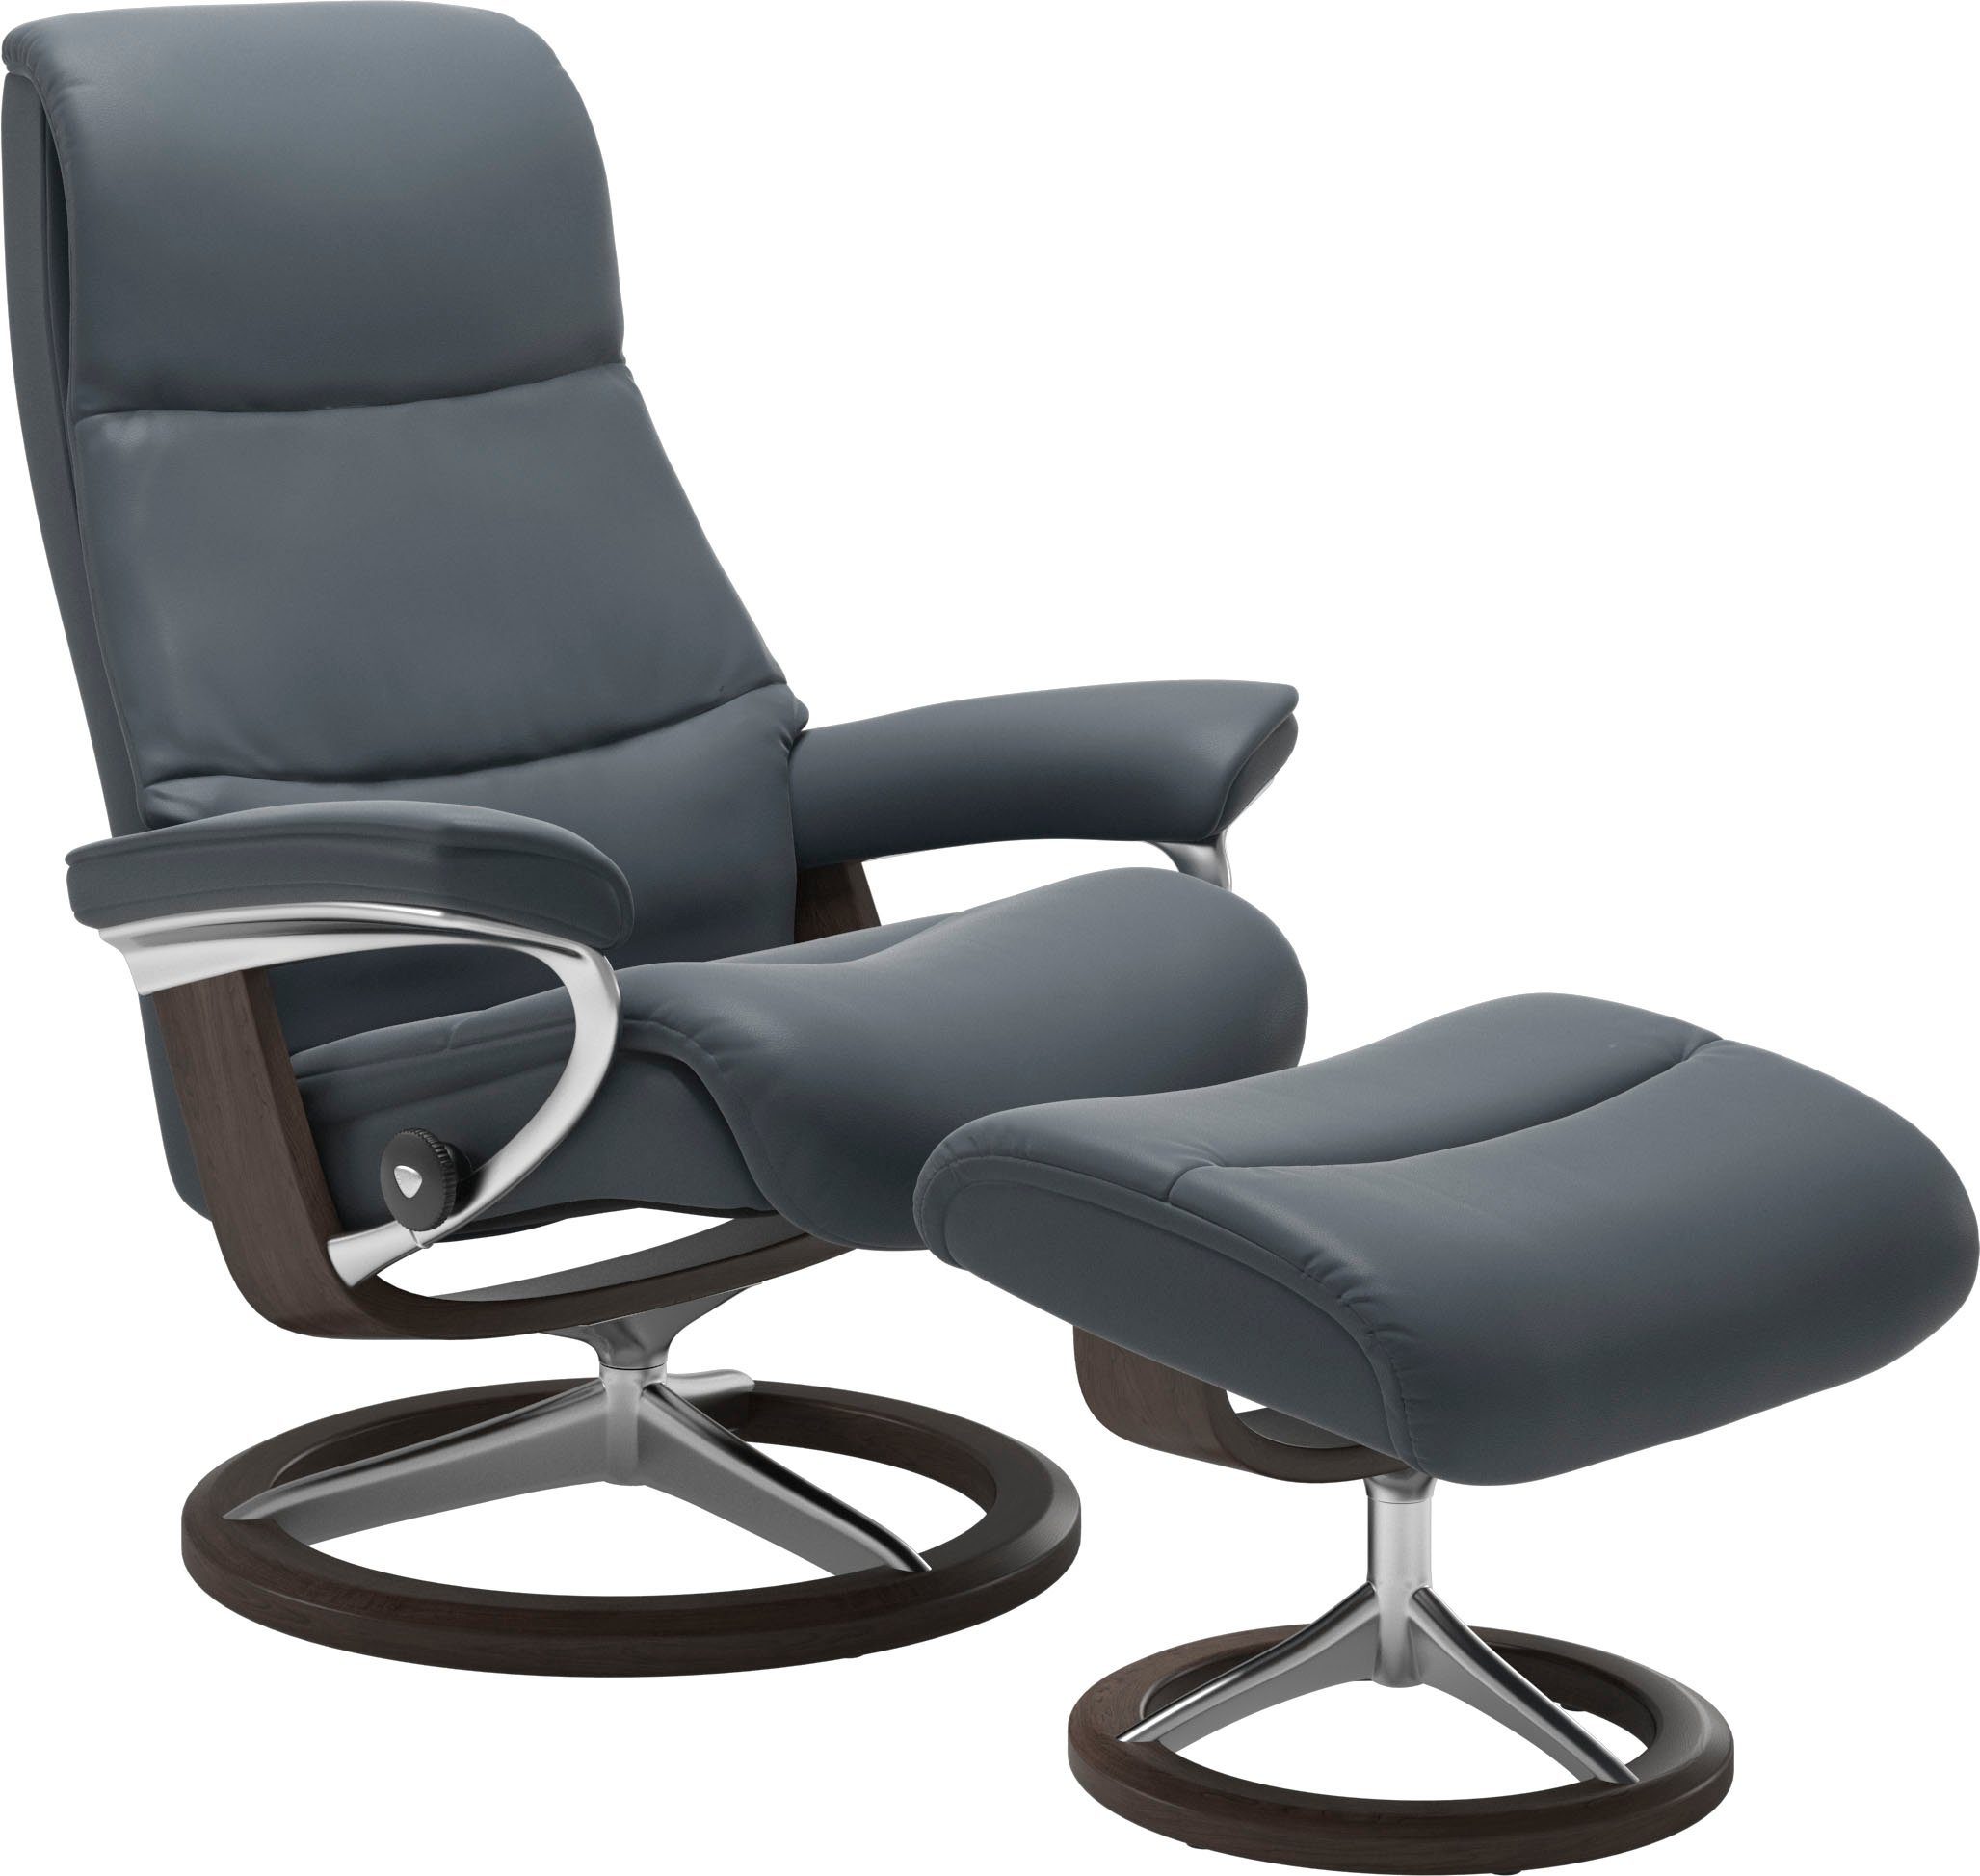 Base, View, S,Gestell mit Signature Wenge Größe Relaxsessel Stressless®